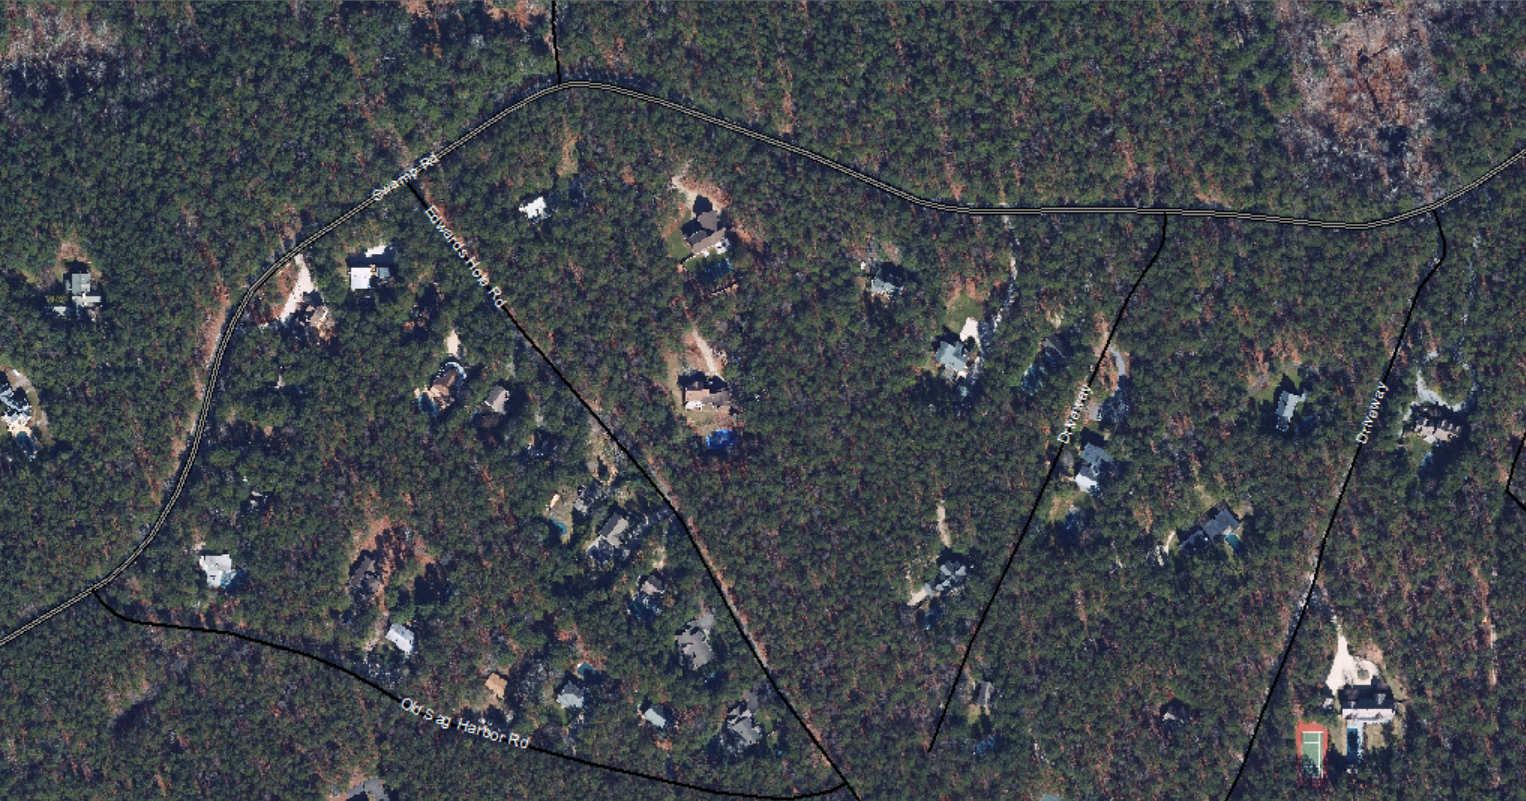 An aerial view of Peter Van Scoyoc's property in the Northwest Woods in 2016, prior to the southern pine beetle's arrival. COURTESY EAST HAMPTON TOWN